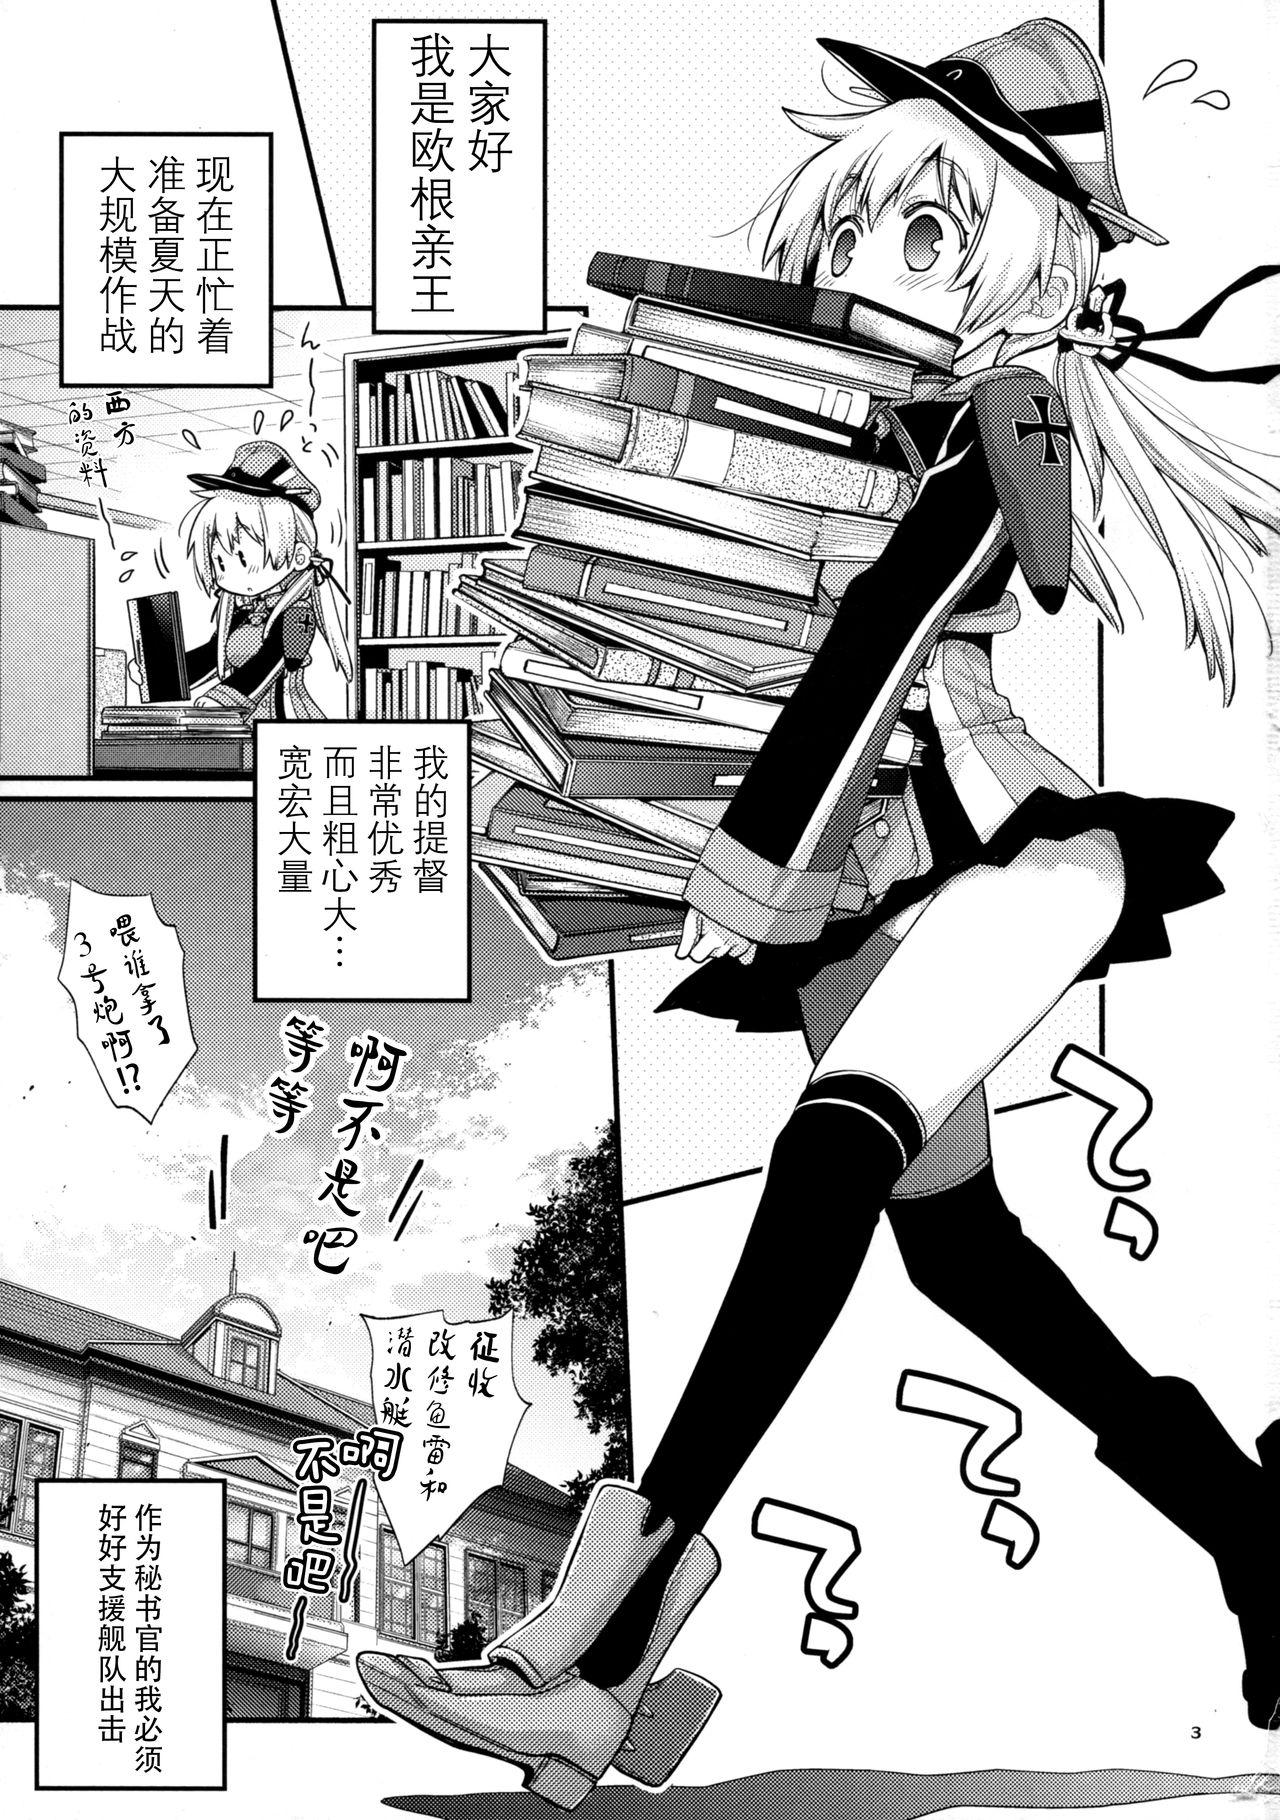 Fist Prinz Pudding 4 - Kantai collection Workout - Page 4